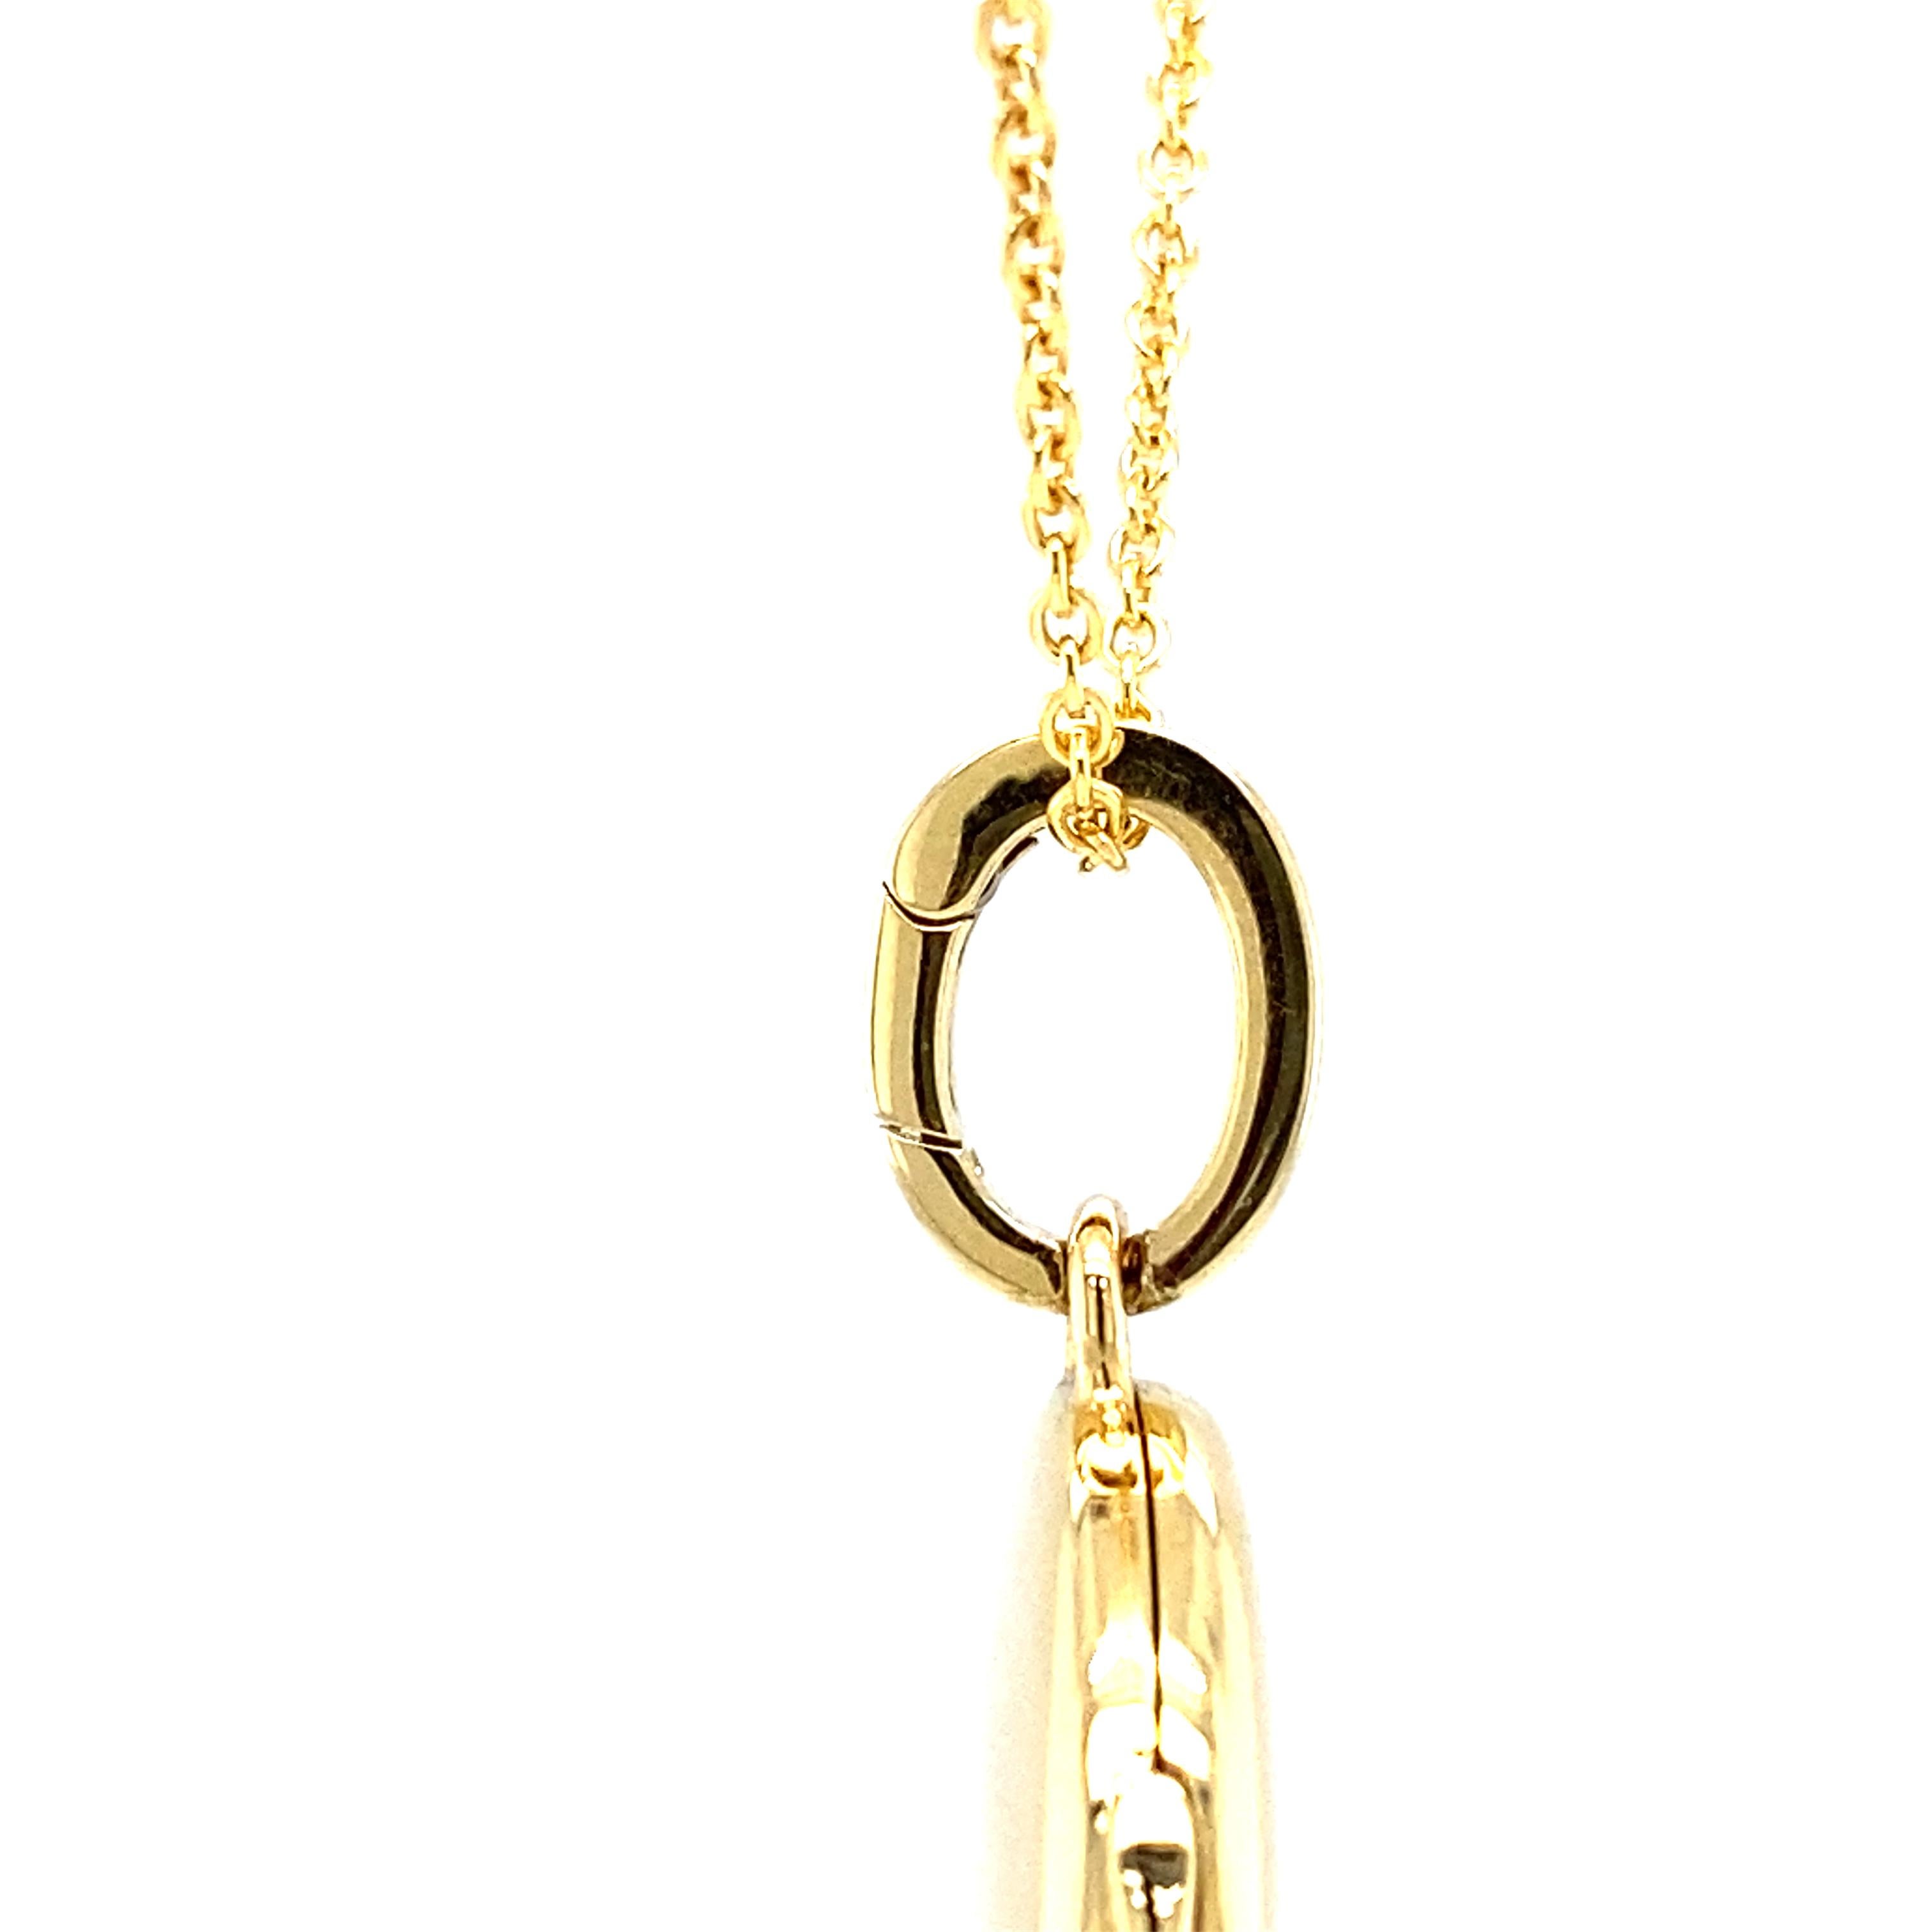 Customizable Oval Polished Pendant Locket Necklace 18k Yellow Gold 23 mm x 20 mm For Sale 2